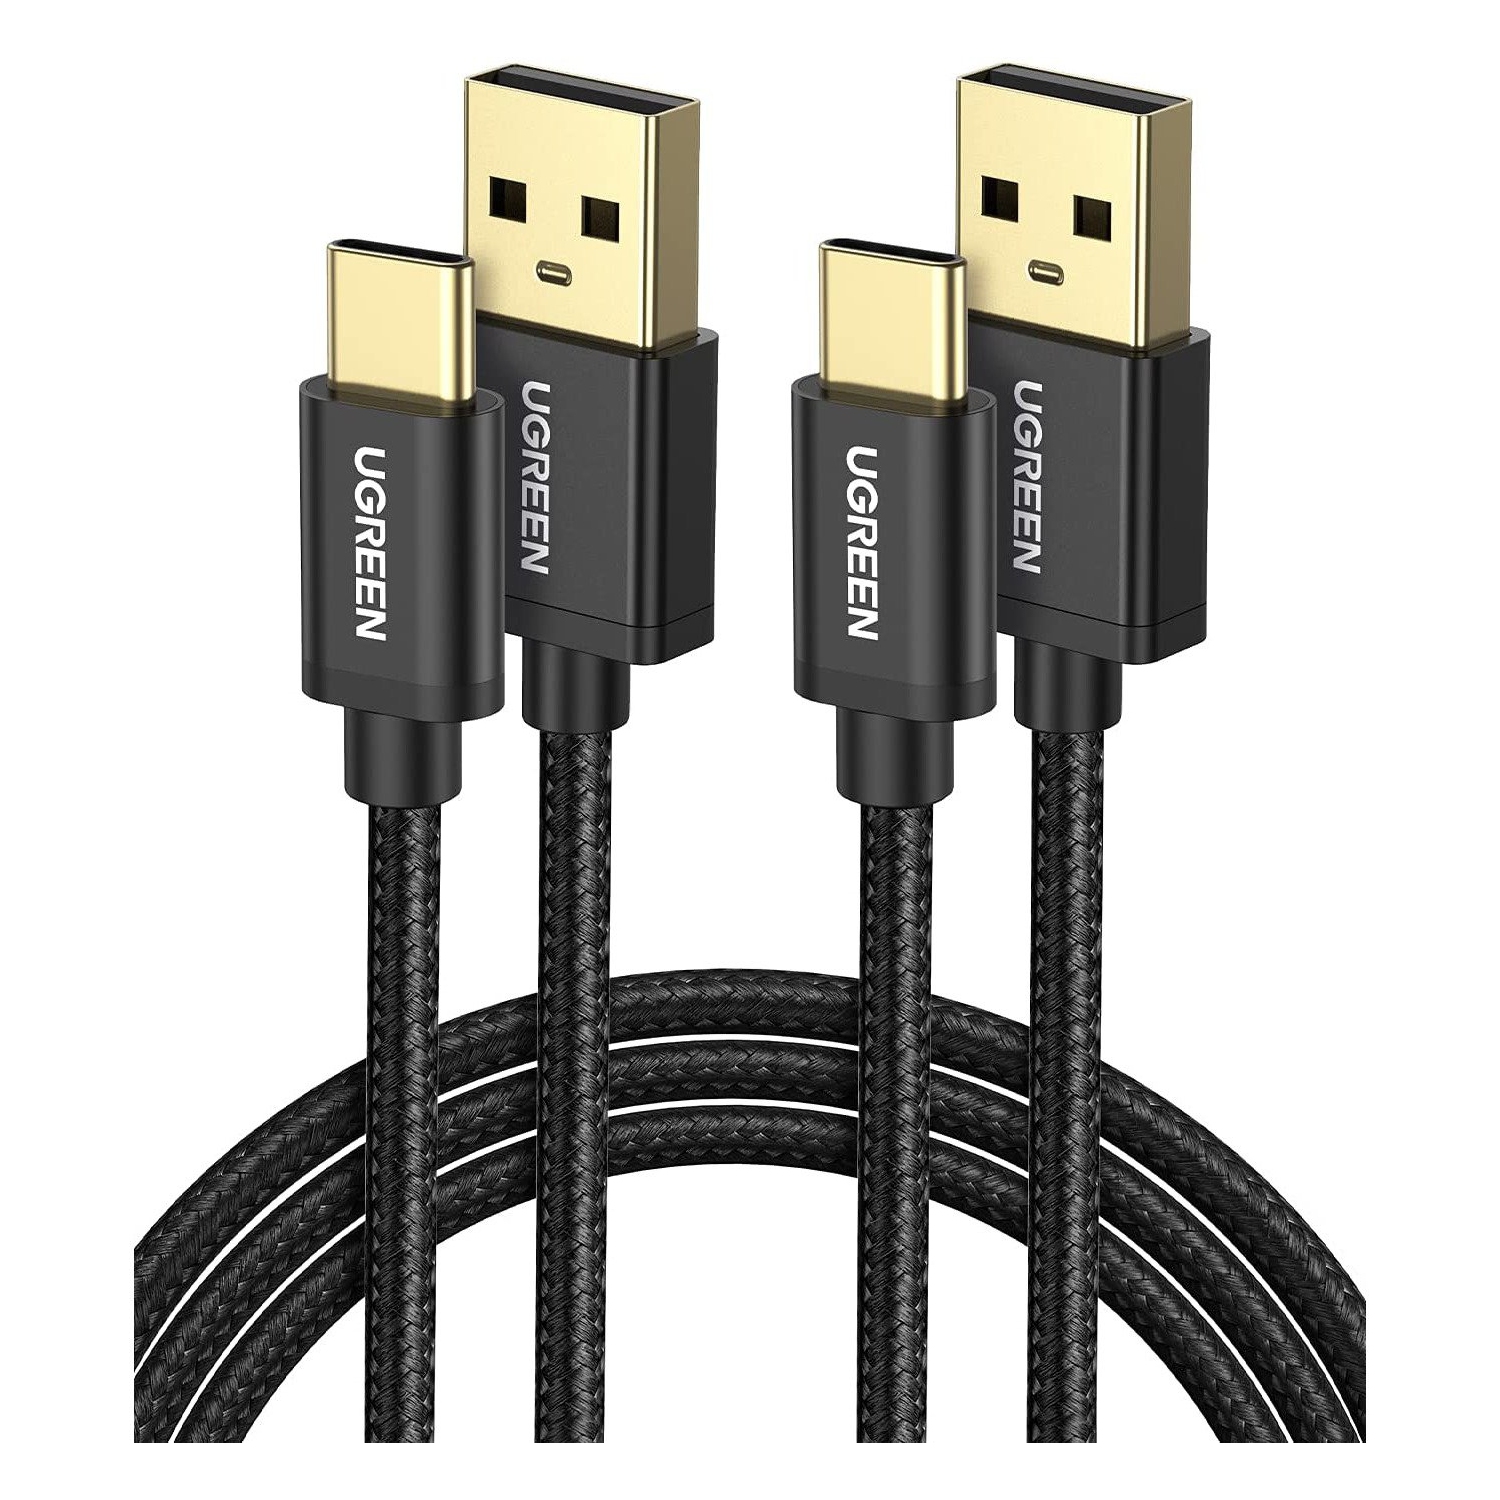 USB C cable 2 pack Type C 3A fast charging nylon 3 feet UGREEN